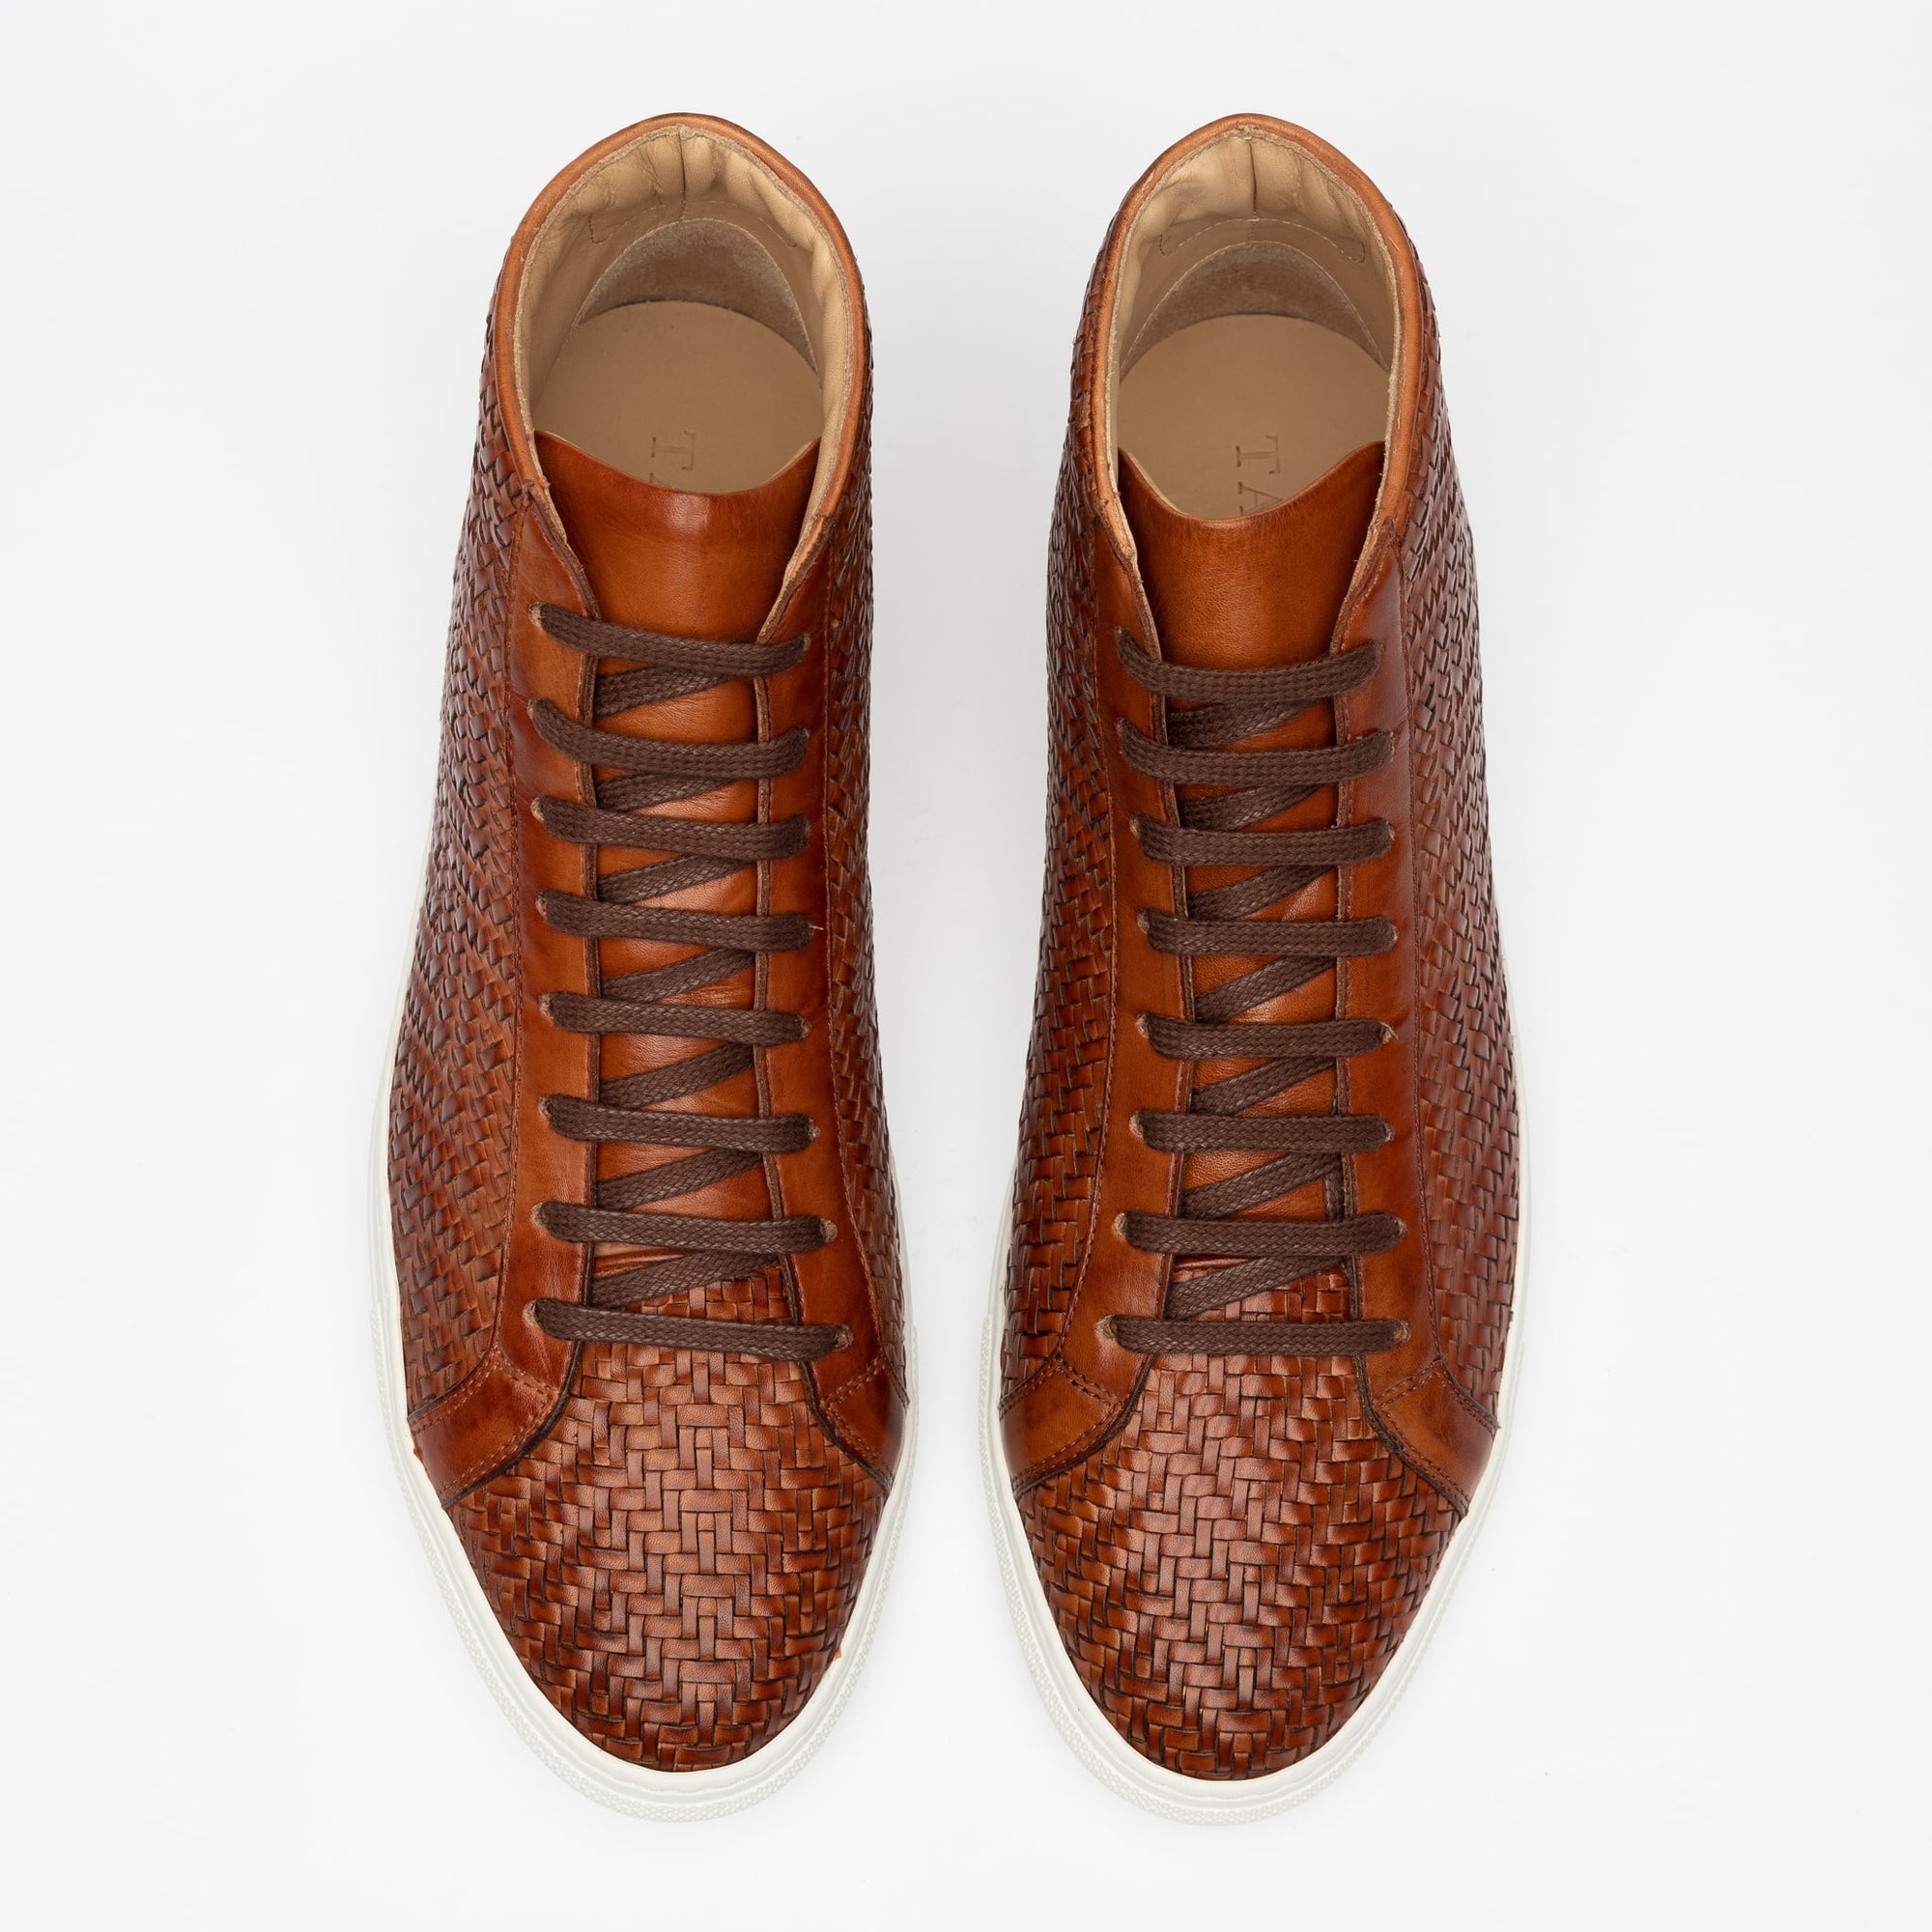 The Hightop in Woven